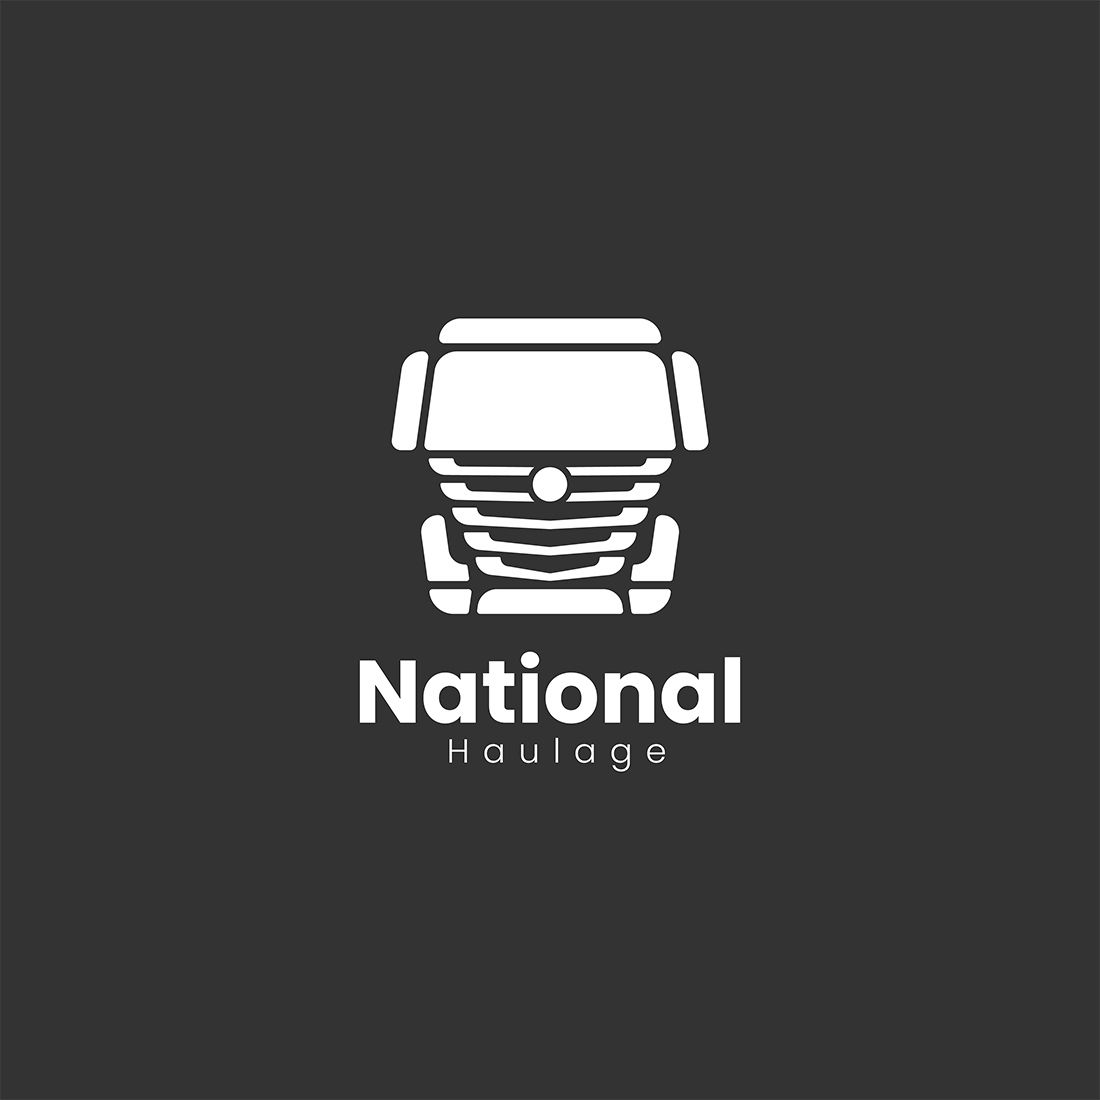 National Haulage Logo white and gray version.